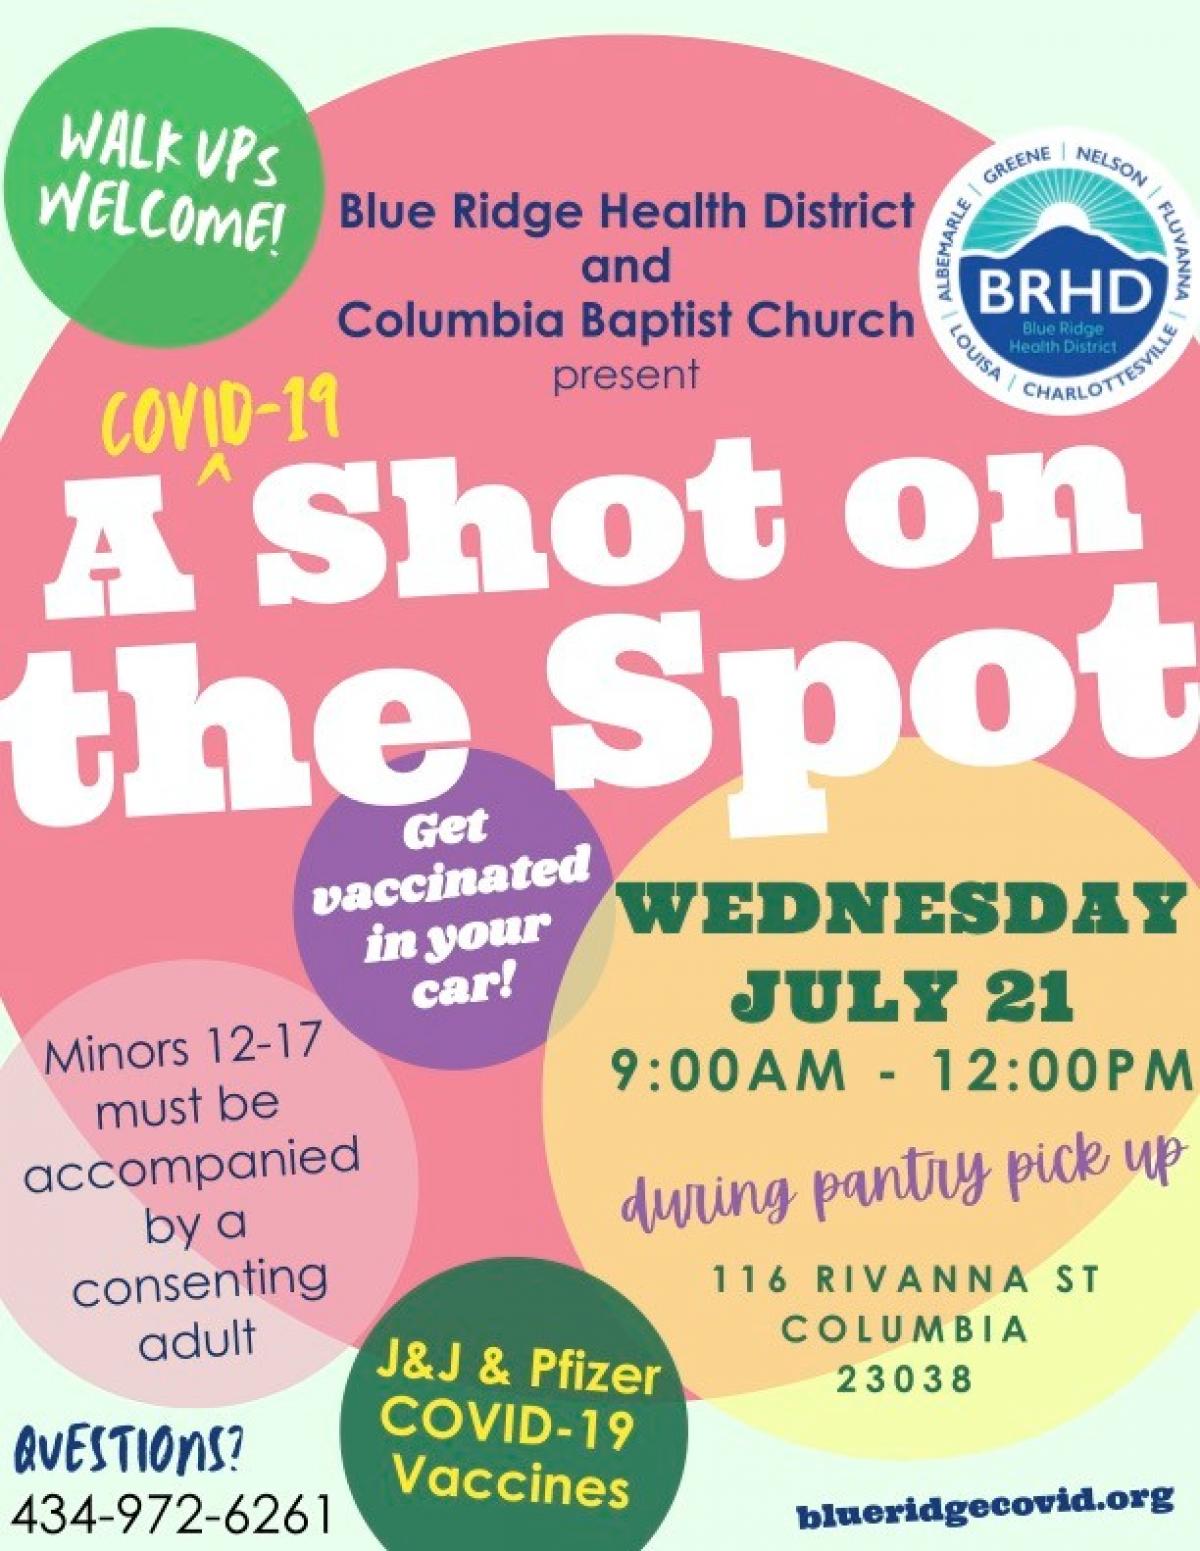 Blue Ridge Health District and Columbia Baptist Church are offering COVID-19 Vaccinations in Columbia on Wed, Jul, 21, 2021 